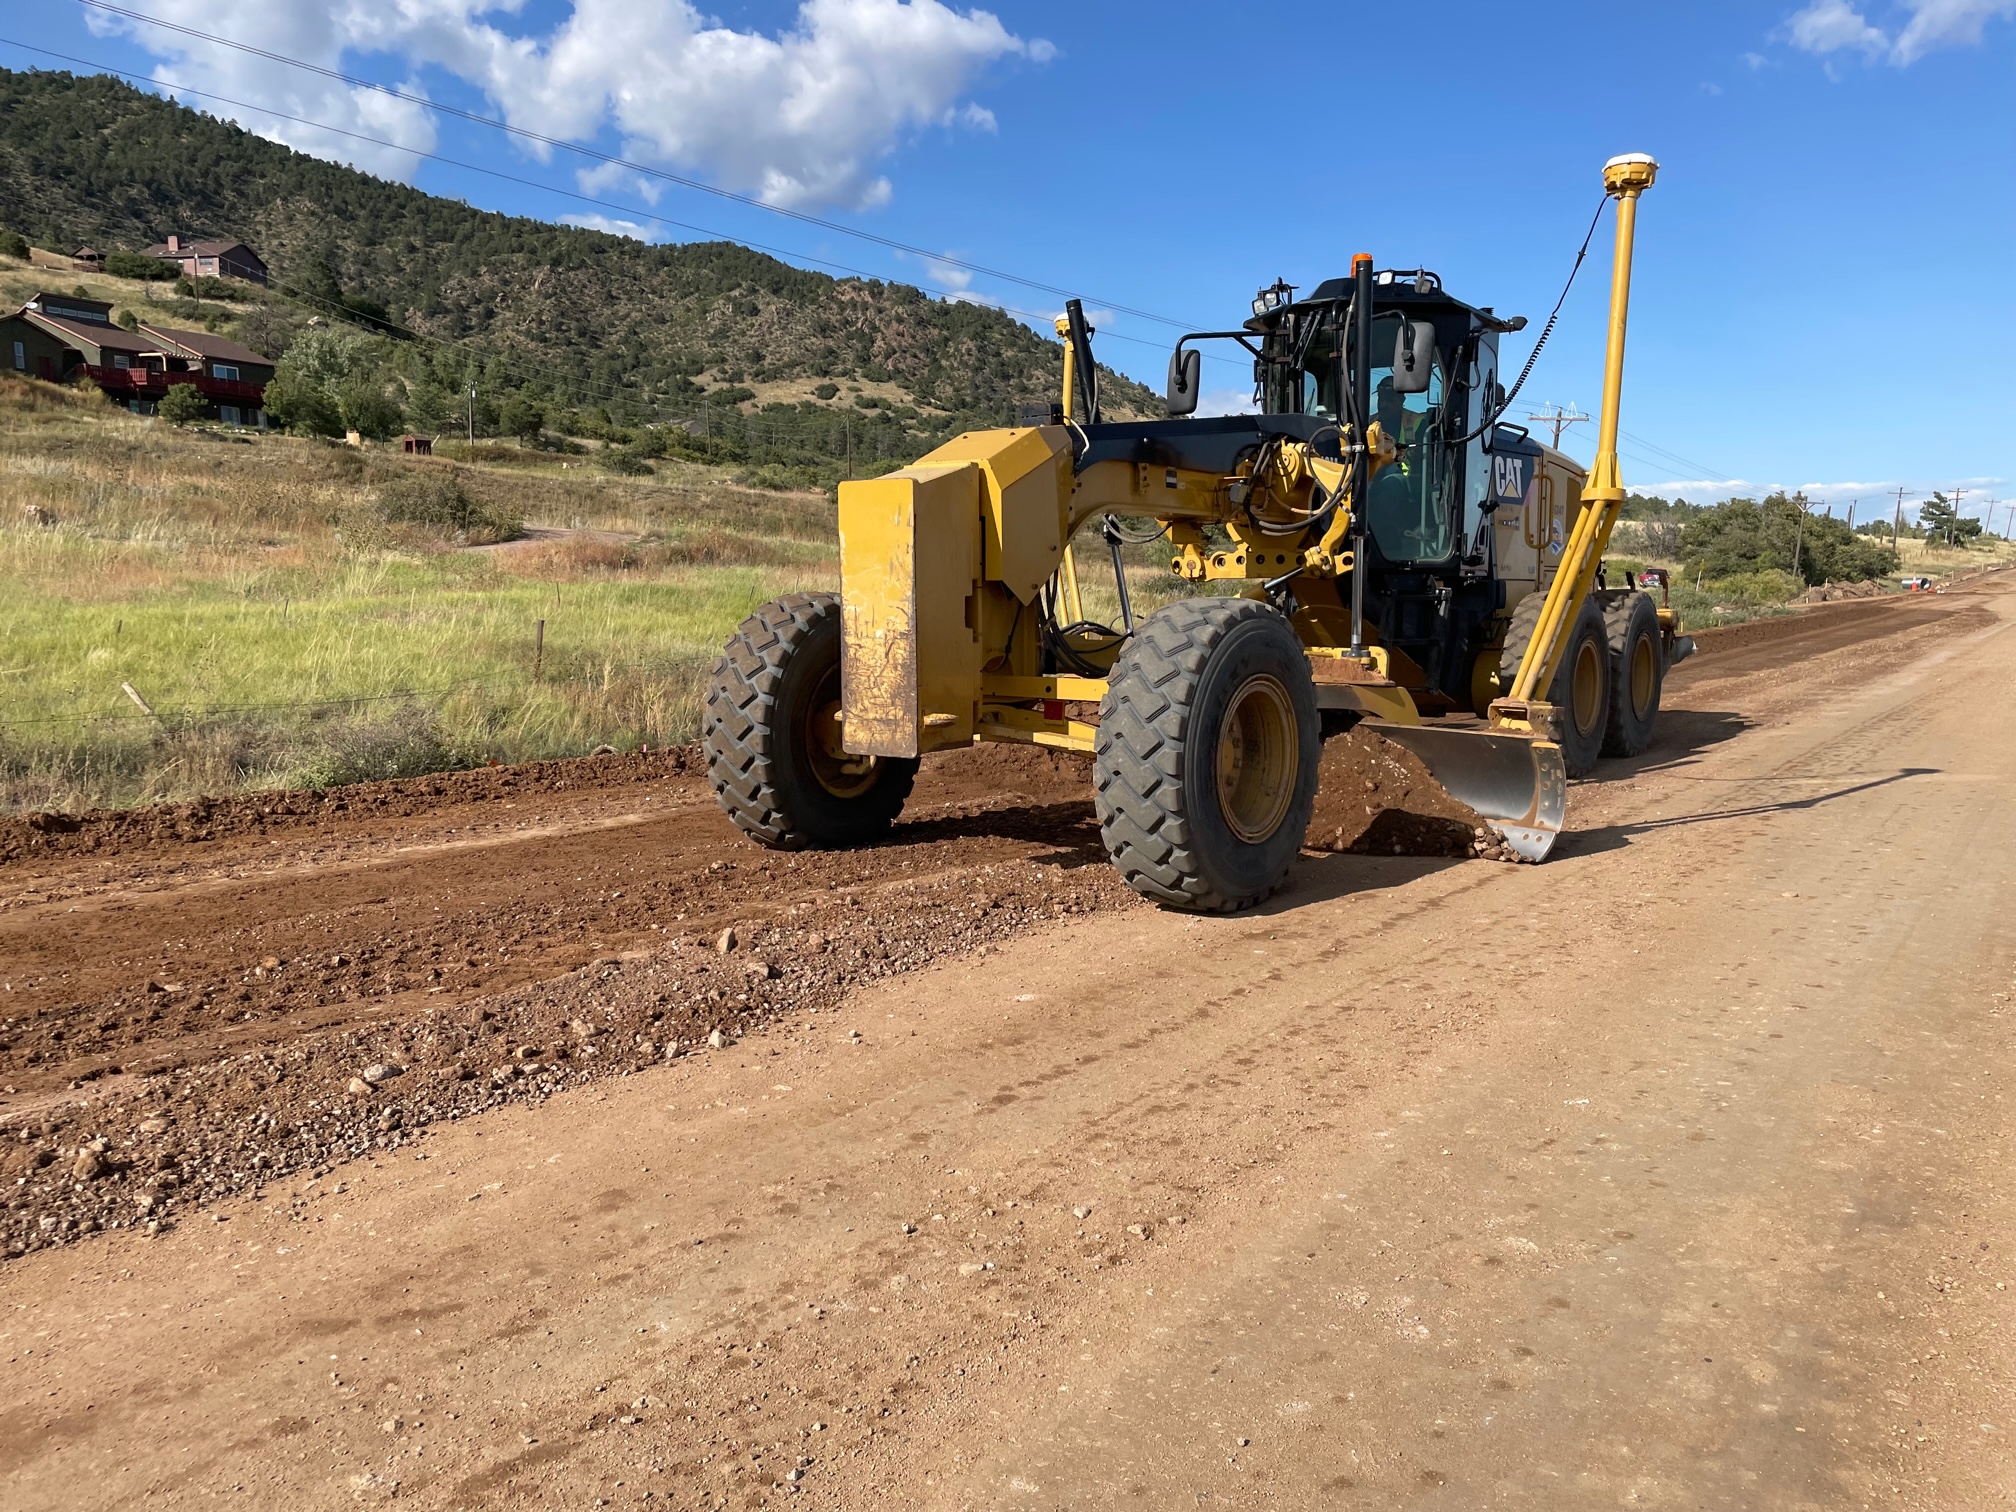 tractor preparing roadway for new concrete paving